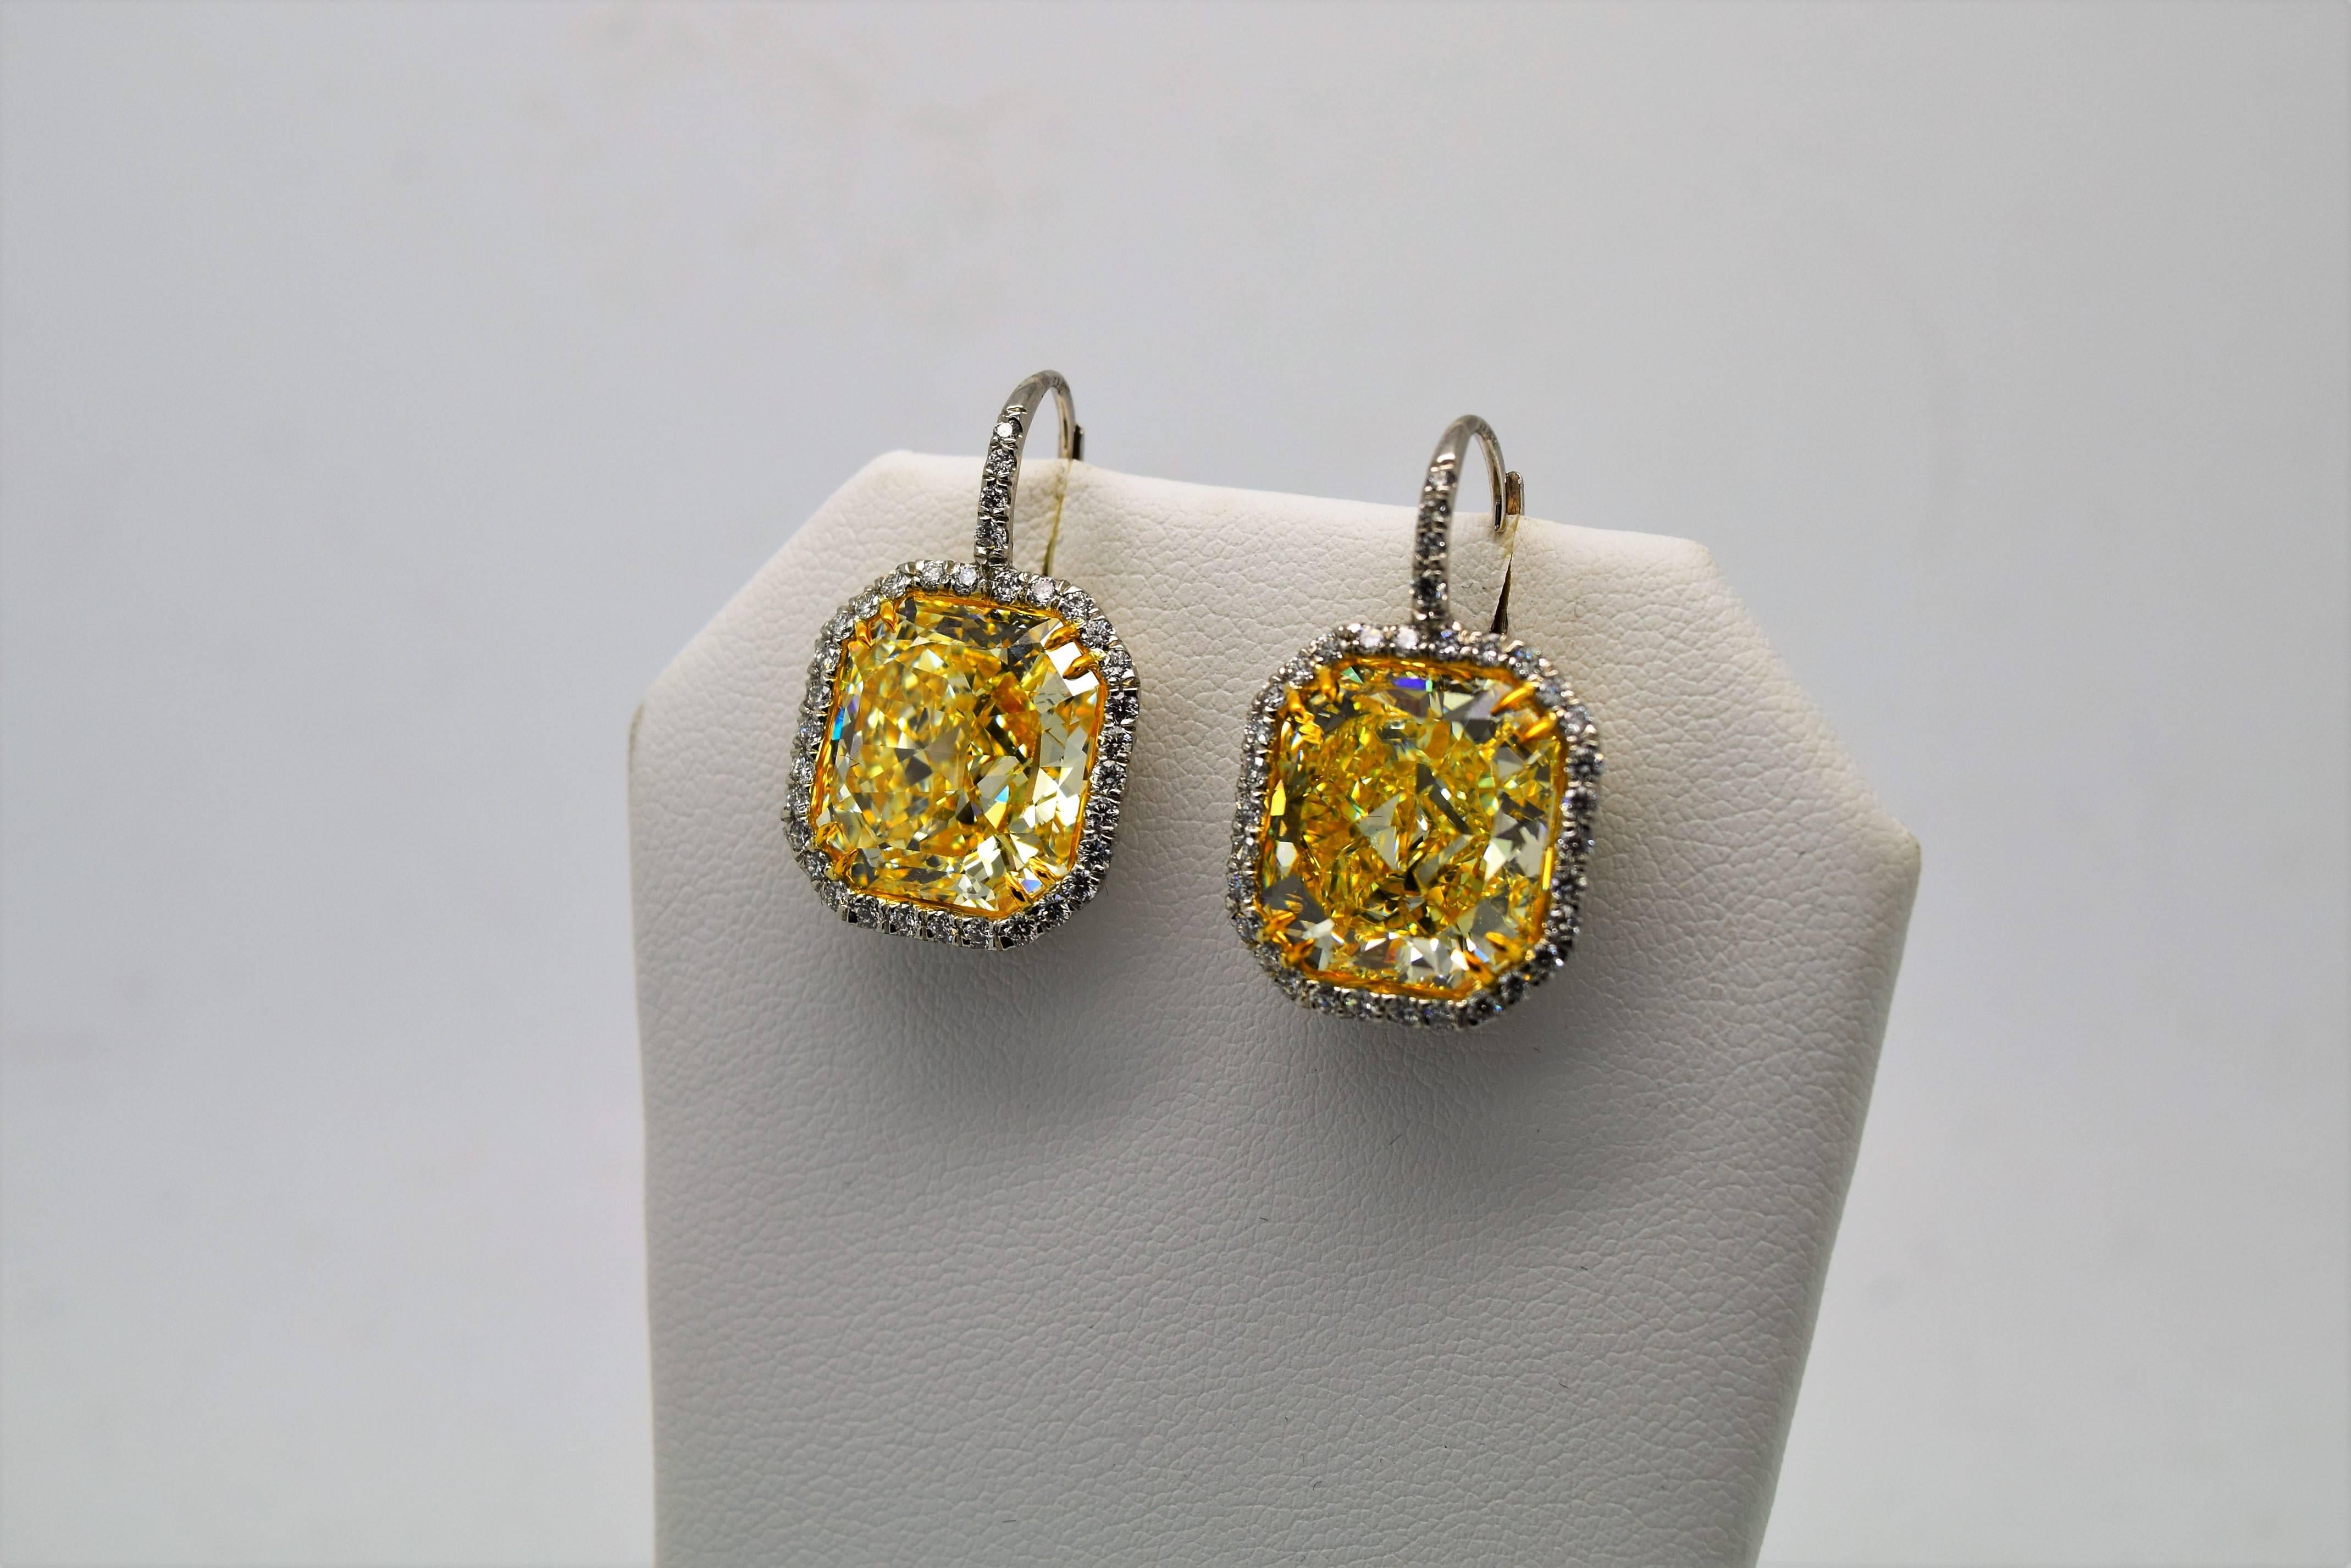 This is a very rare and important pair of 24.33 carat total weight Fancy Yellow Radiant cut diamond earrings set in platinum and white gold.

The earrings consist of two 12 carat Fancy Yellow Radiant cut diamonds:
1) 12.31ct Fancy Yellow VS1